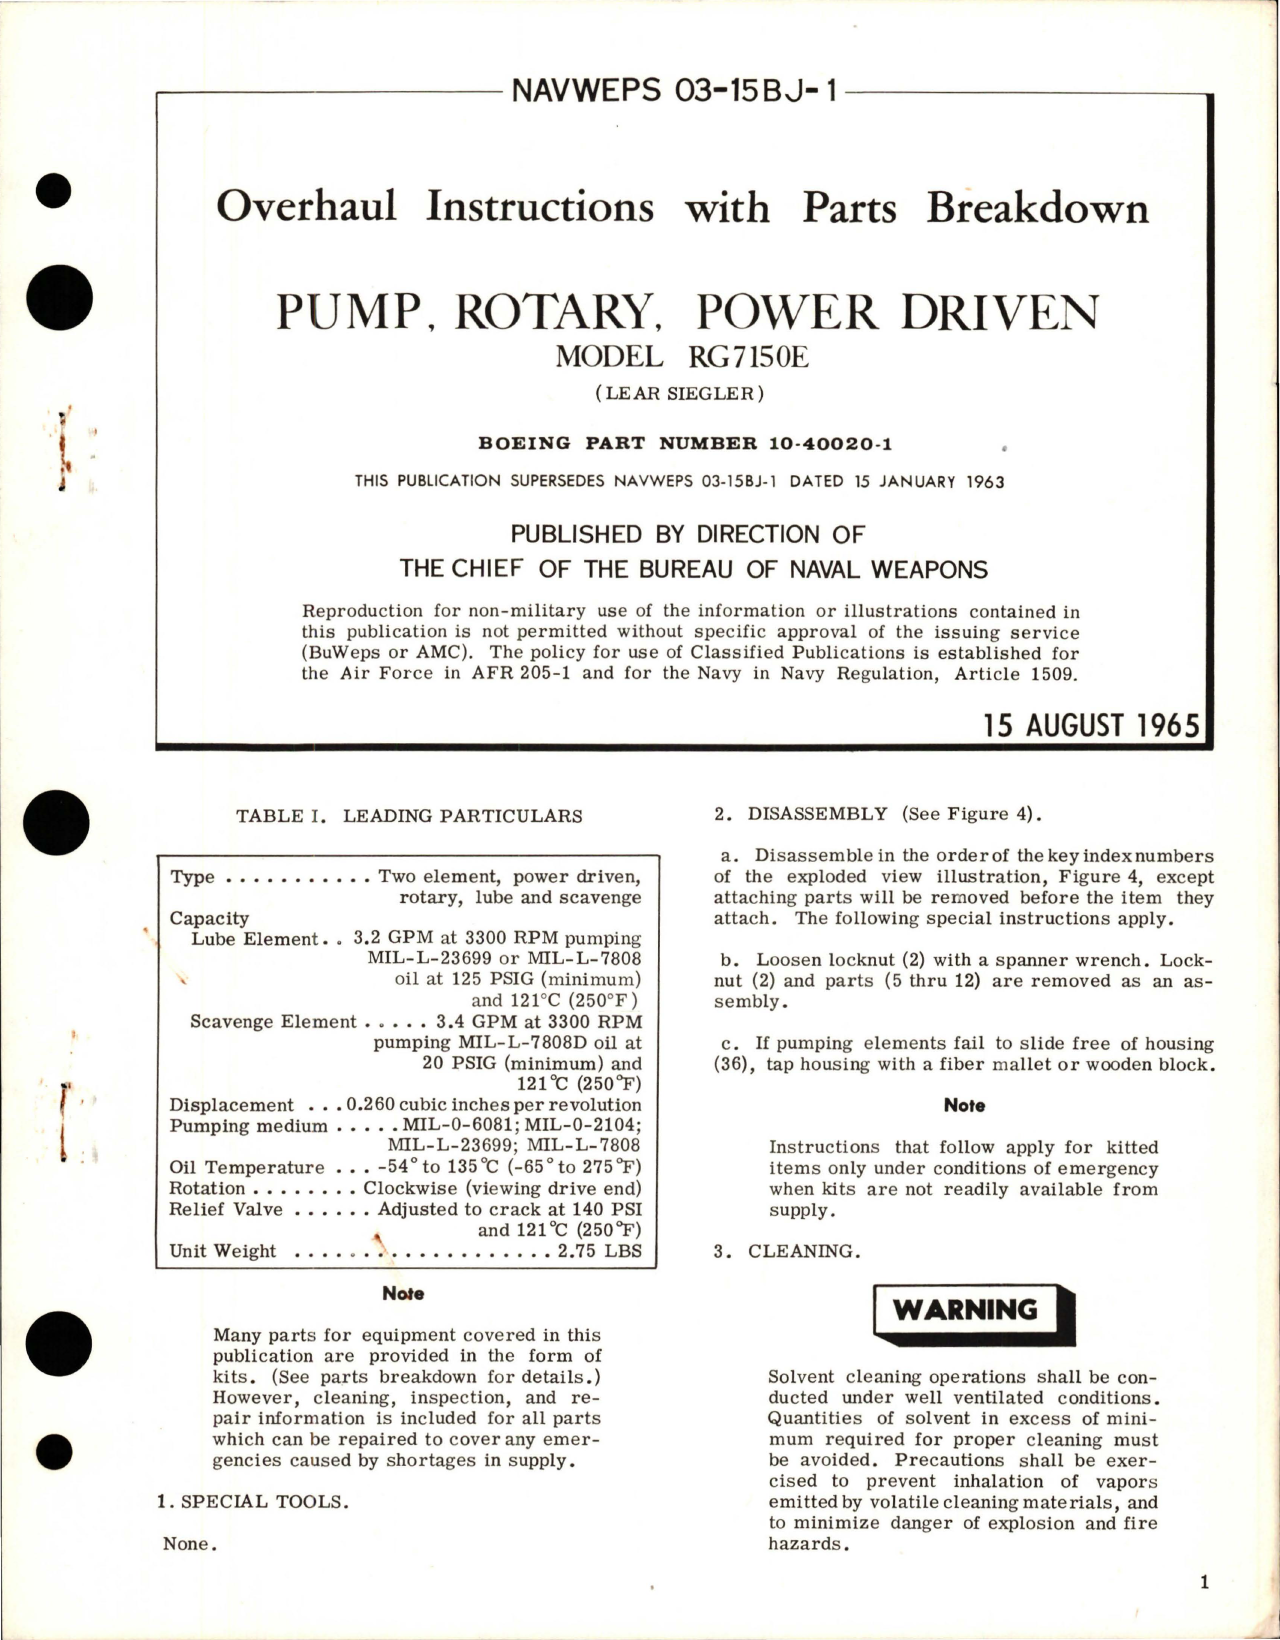 Sample page 1 from AirCorps Library document: Overhaul Instructions with Parts for Power Driven Rotary Pump - Model RG7150E